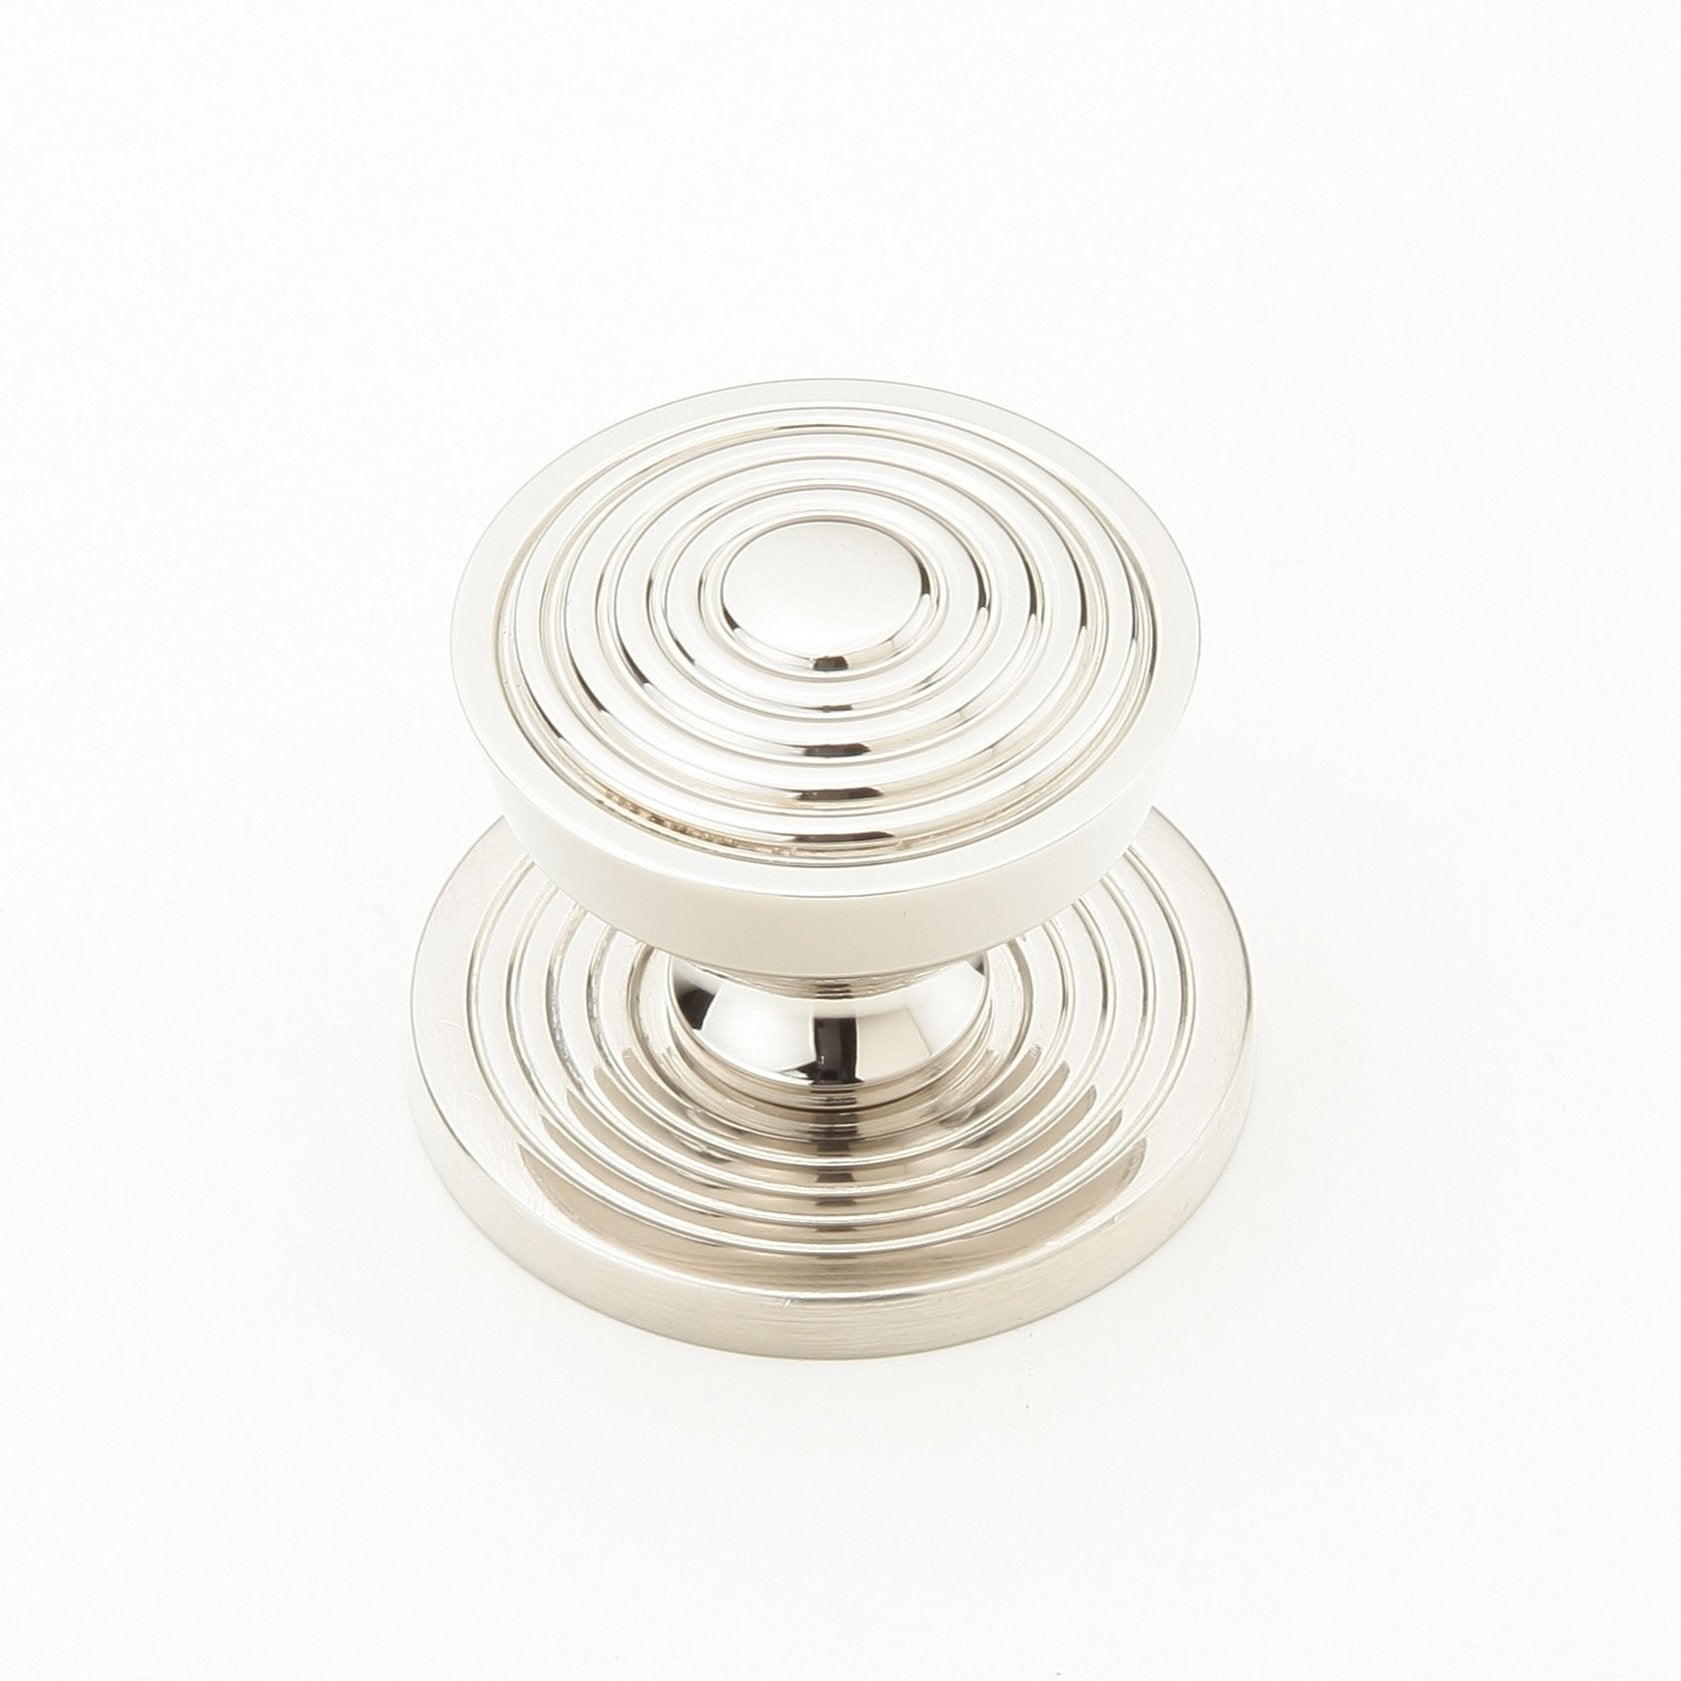 Polished Nickel Reeded Beehive 1-1/8" Round Knob w/ Backplate | Knobs